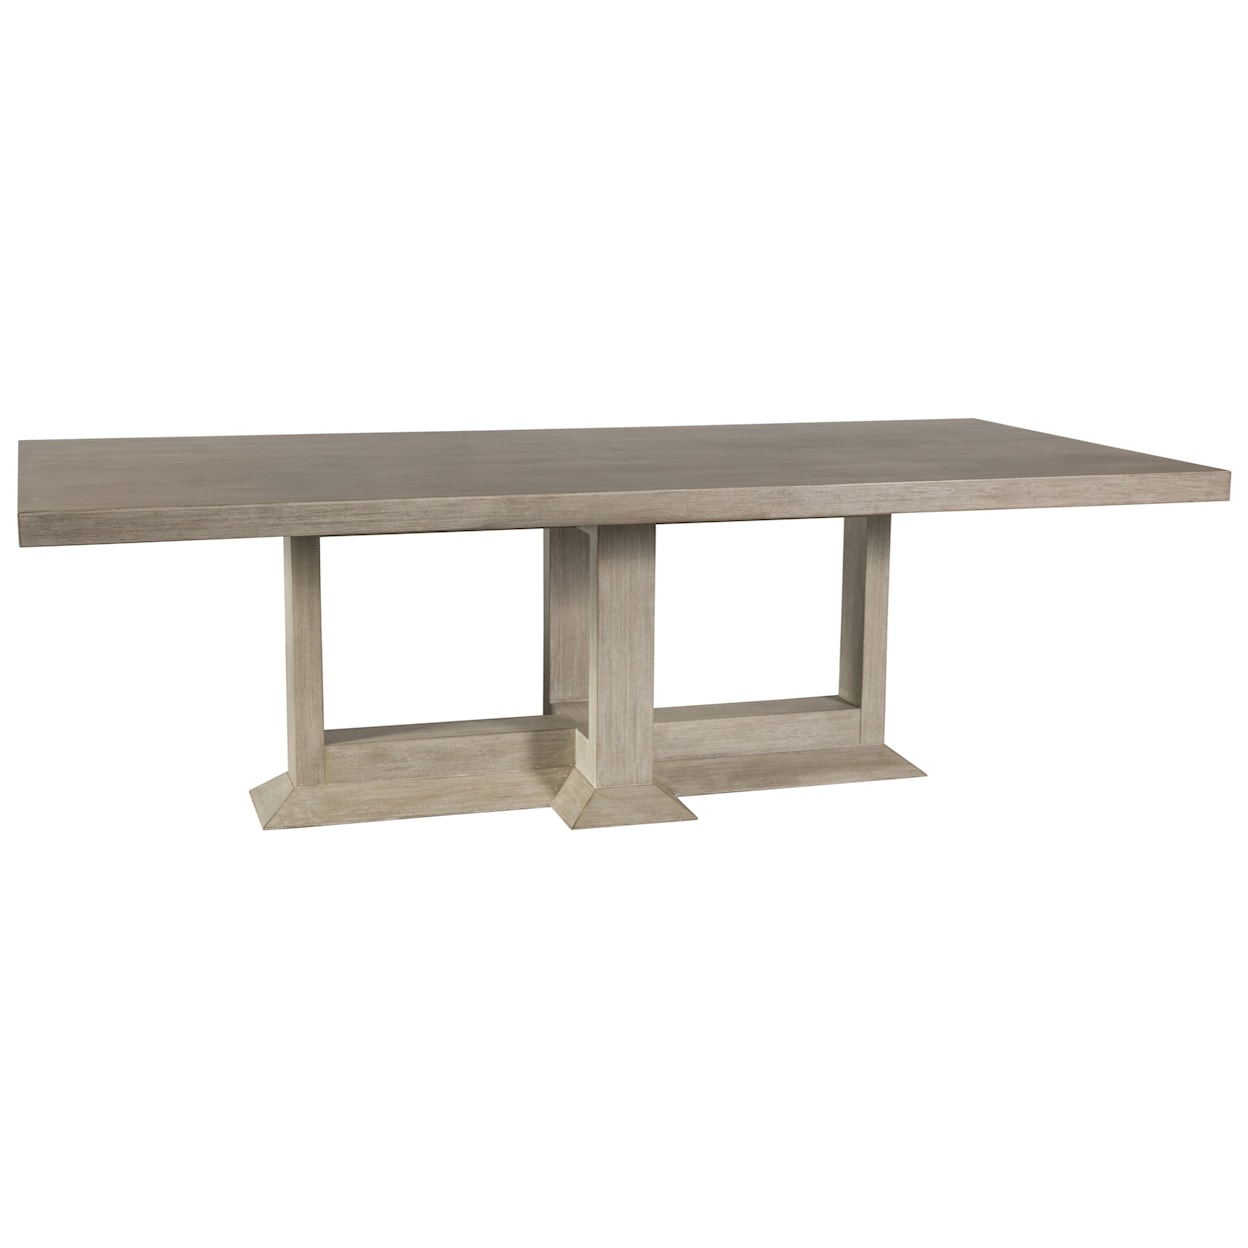 Artistica Cohesion Emissary Rectangular Dining Table